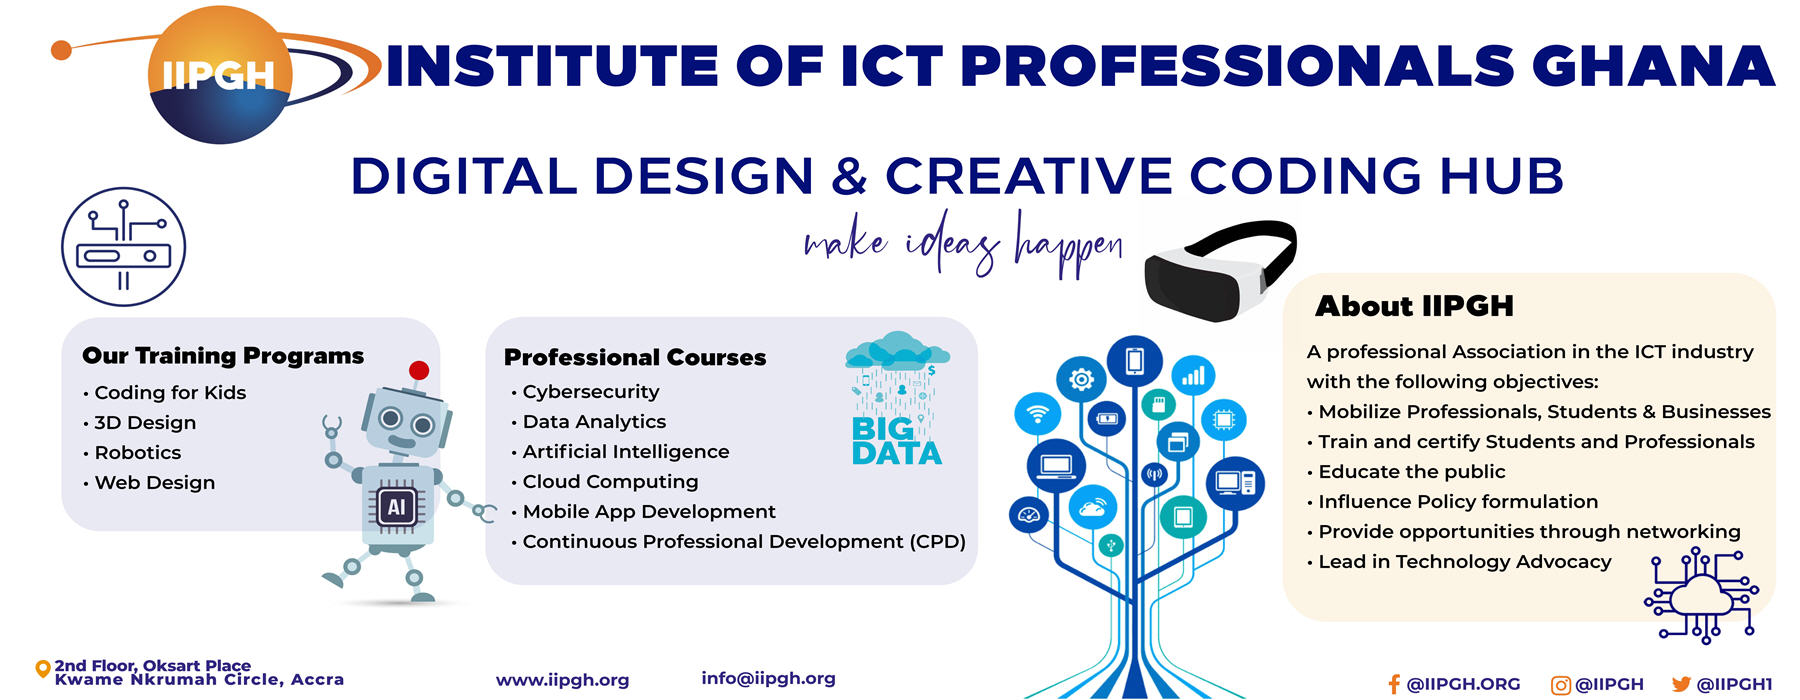 Institute of ICT Professionals Ghana (IIPGH) as a Professional Body